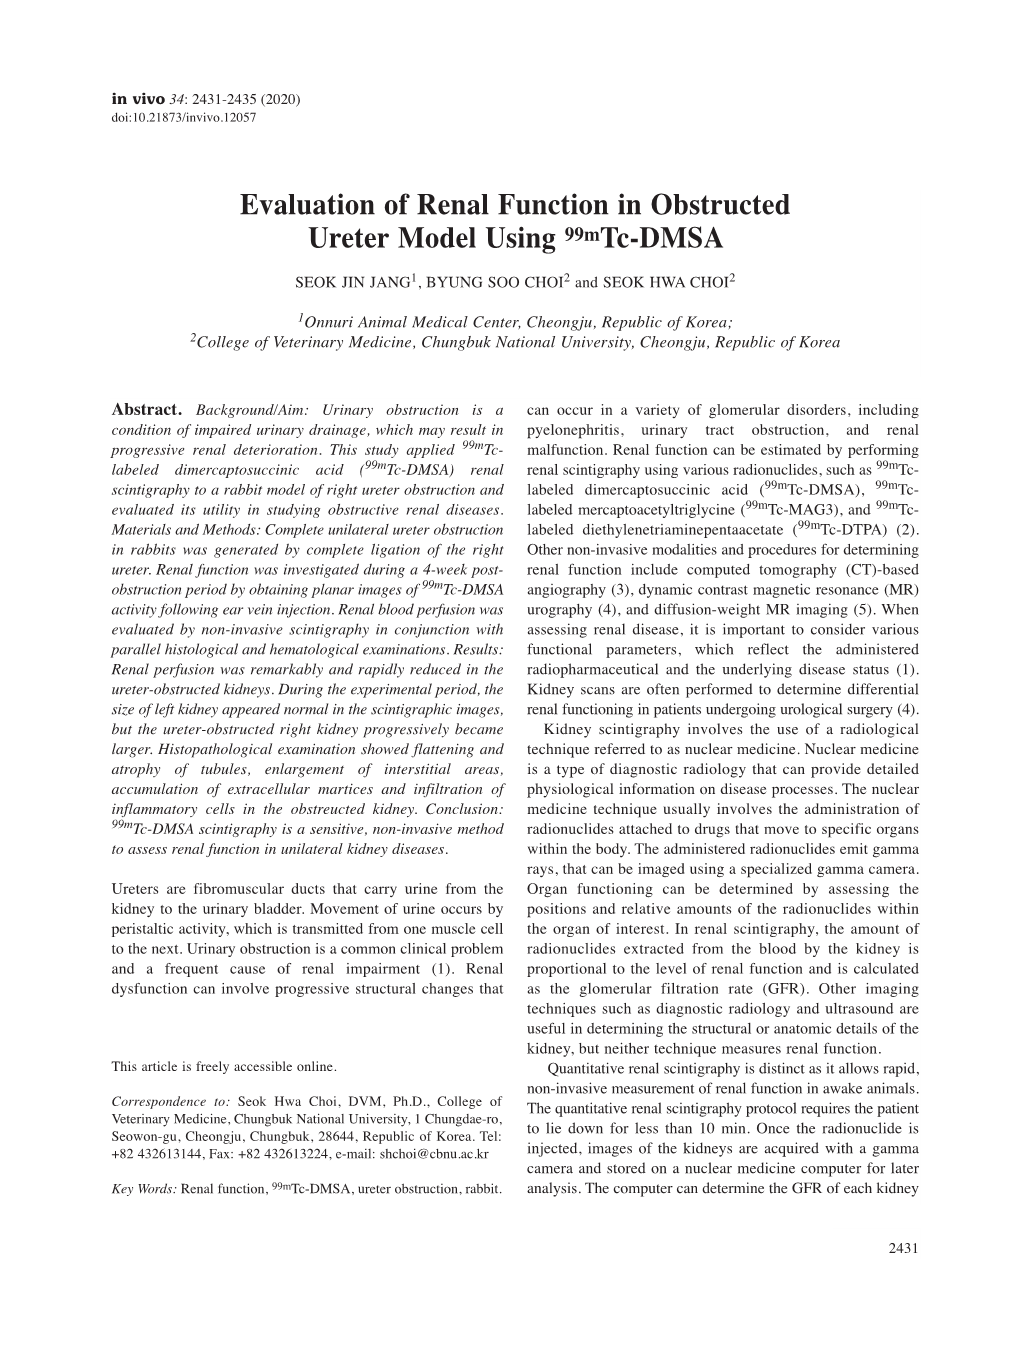 Evaluation of Renal Function in Obstructed Ureter Model Using 99M Tc-DMSA SEOK JIN JANG 1, BYUNG SOO CHOI 2 and SEOK HWA CHOI 2